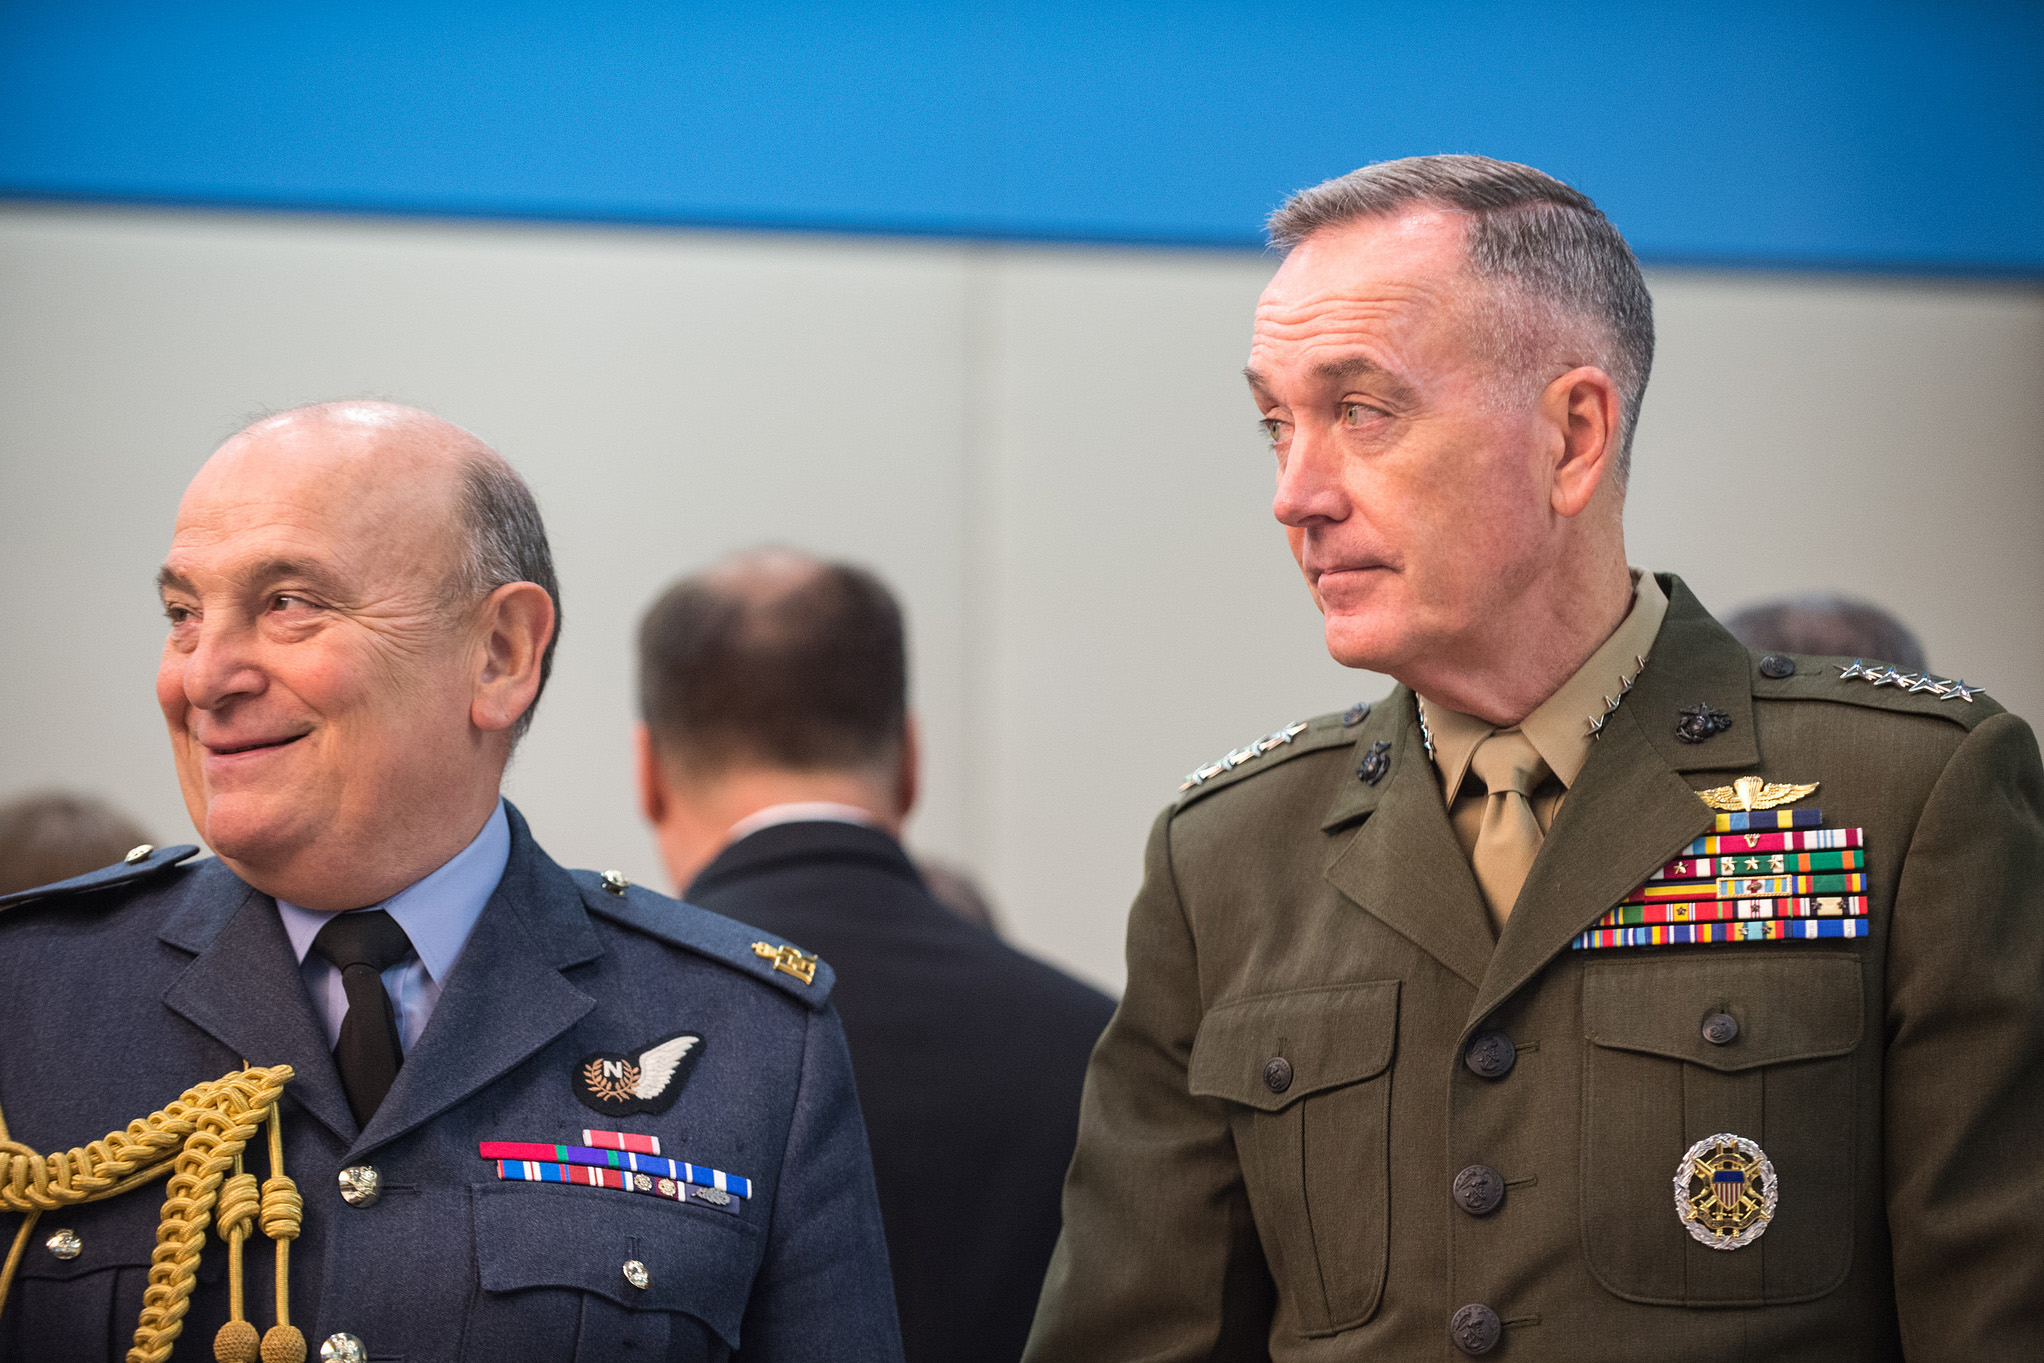 Marine Corps Gen. Joe Dunford, chairman of the Joint Chiefs of Staff, speaks with Air Chief Marshal Sir Stuart Peach, the United Kingdom’s chief of defense, before a meeting of the NATO Military Committee alliance at the alliance’s headquarters in Brussels, Jan. 17, 2017. DoD photo by Army Sgt. James K. McCann. -